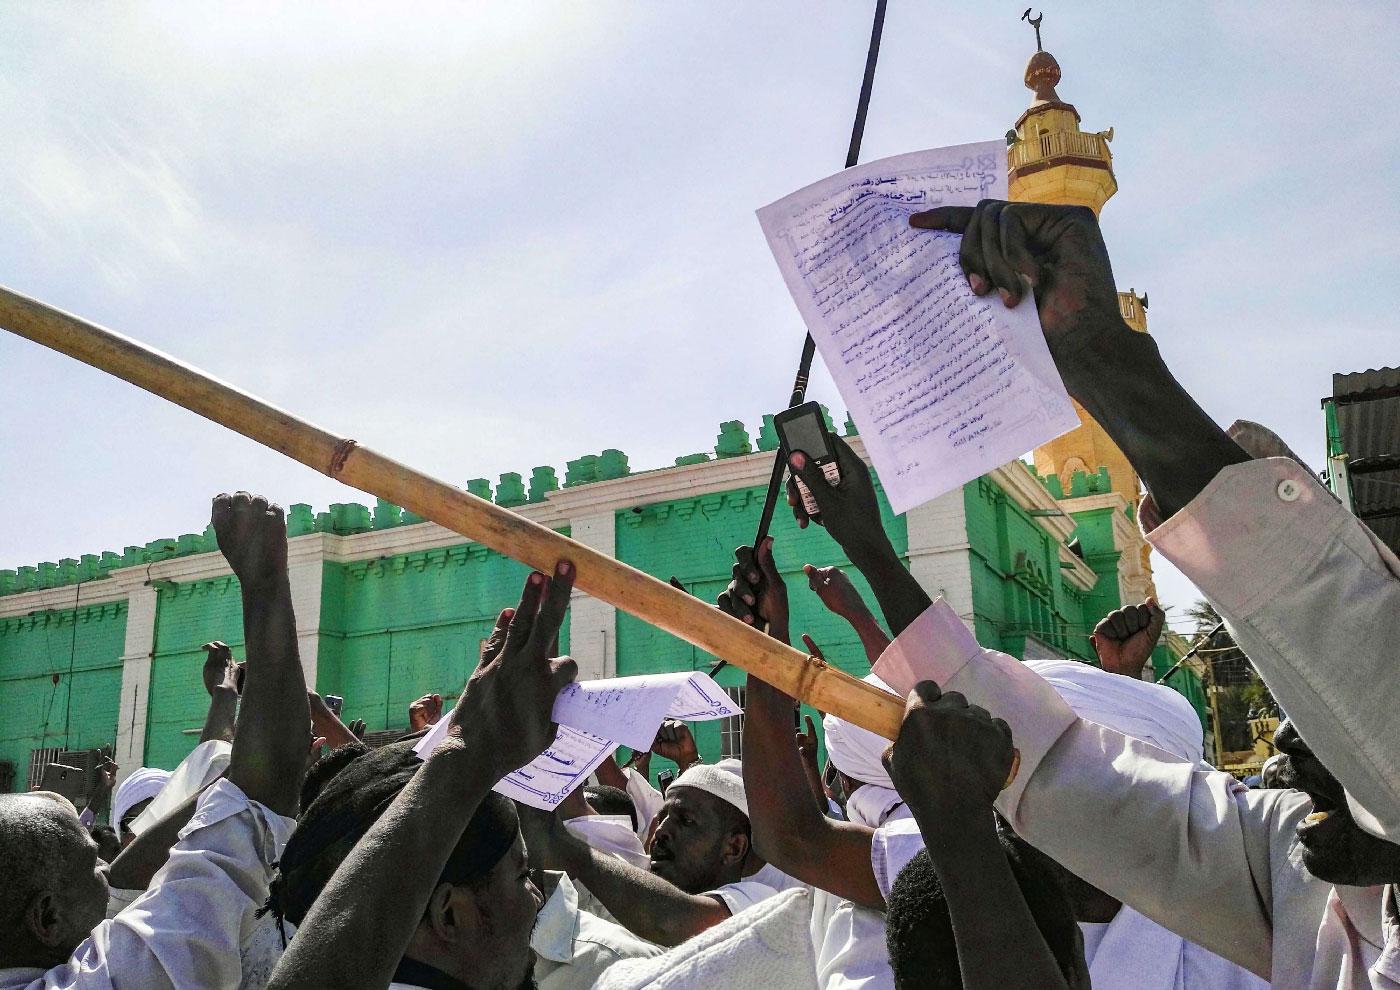 Sudanese protesters chant slogans and raise signs against President Omar al-Bashir during a demonstration in the capital Khartoum's twin city of Omdurman on January 25, 2019.